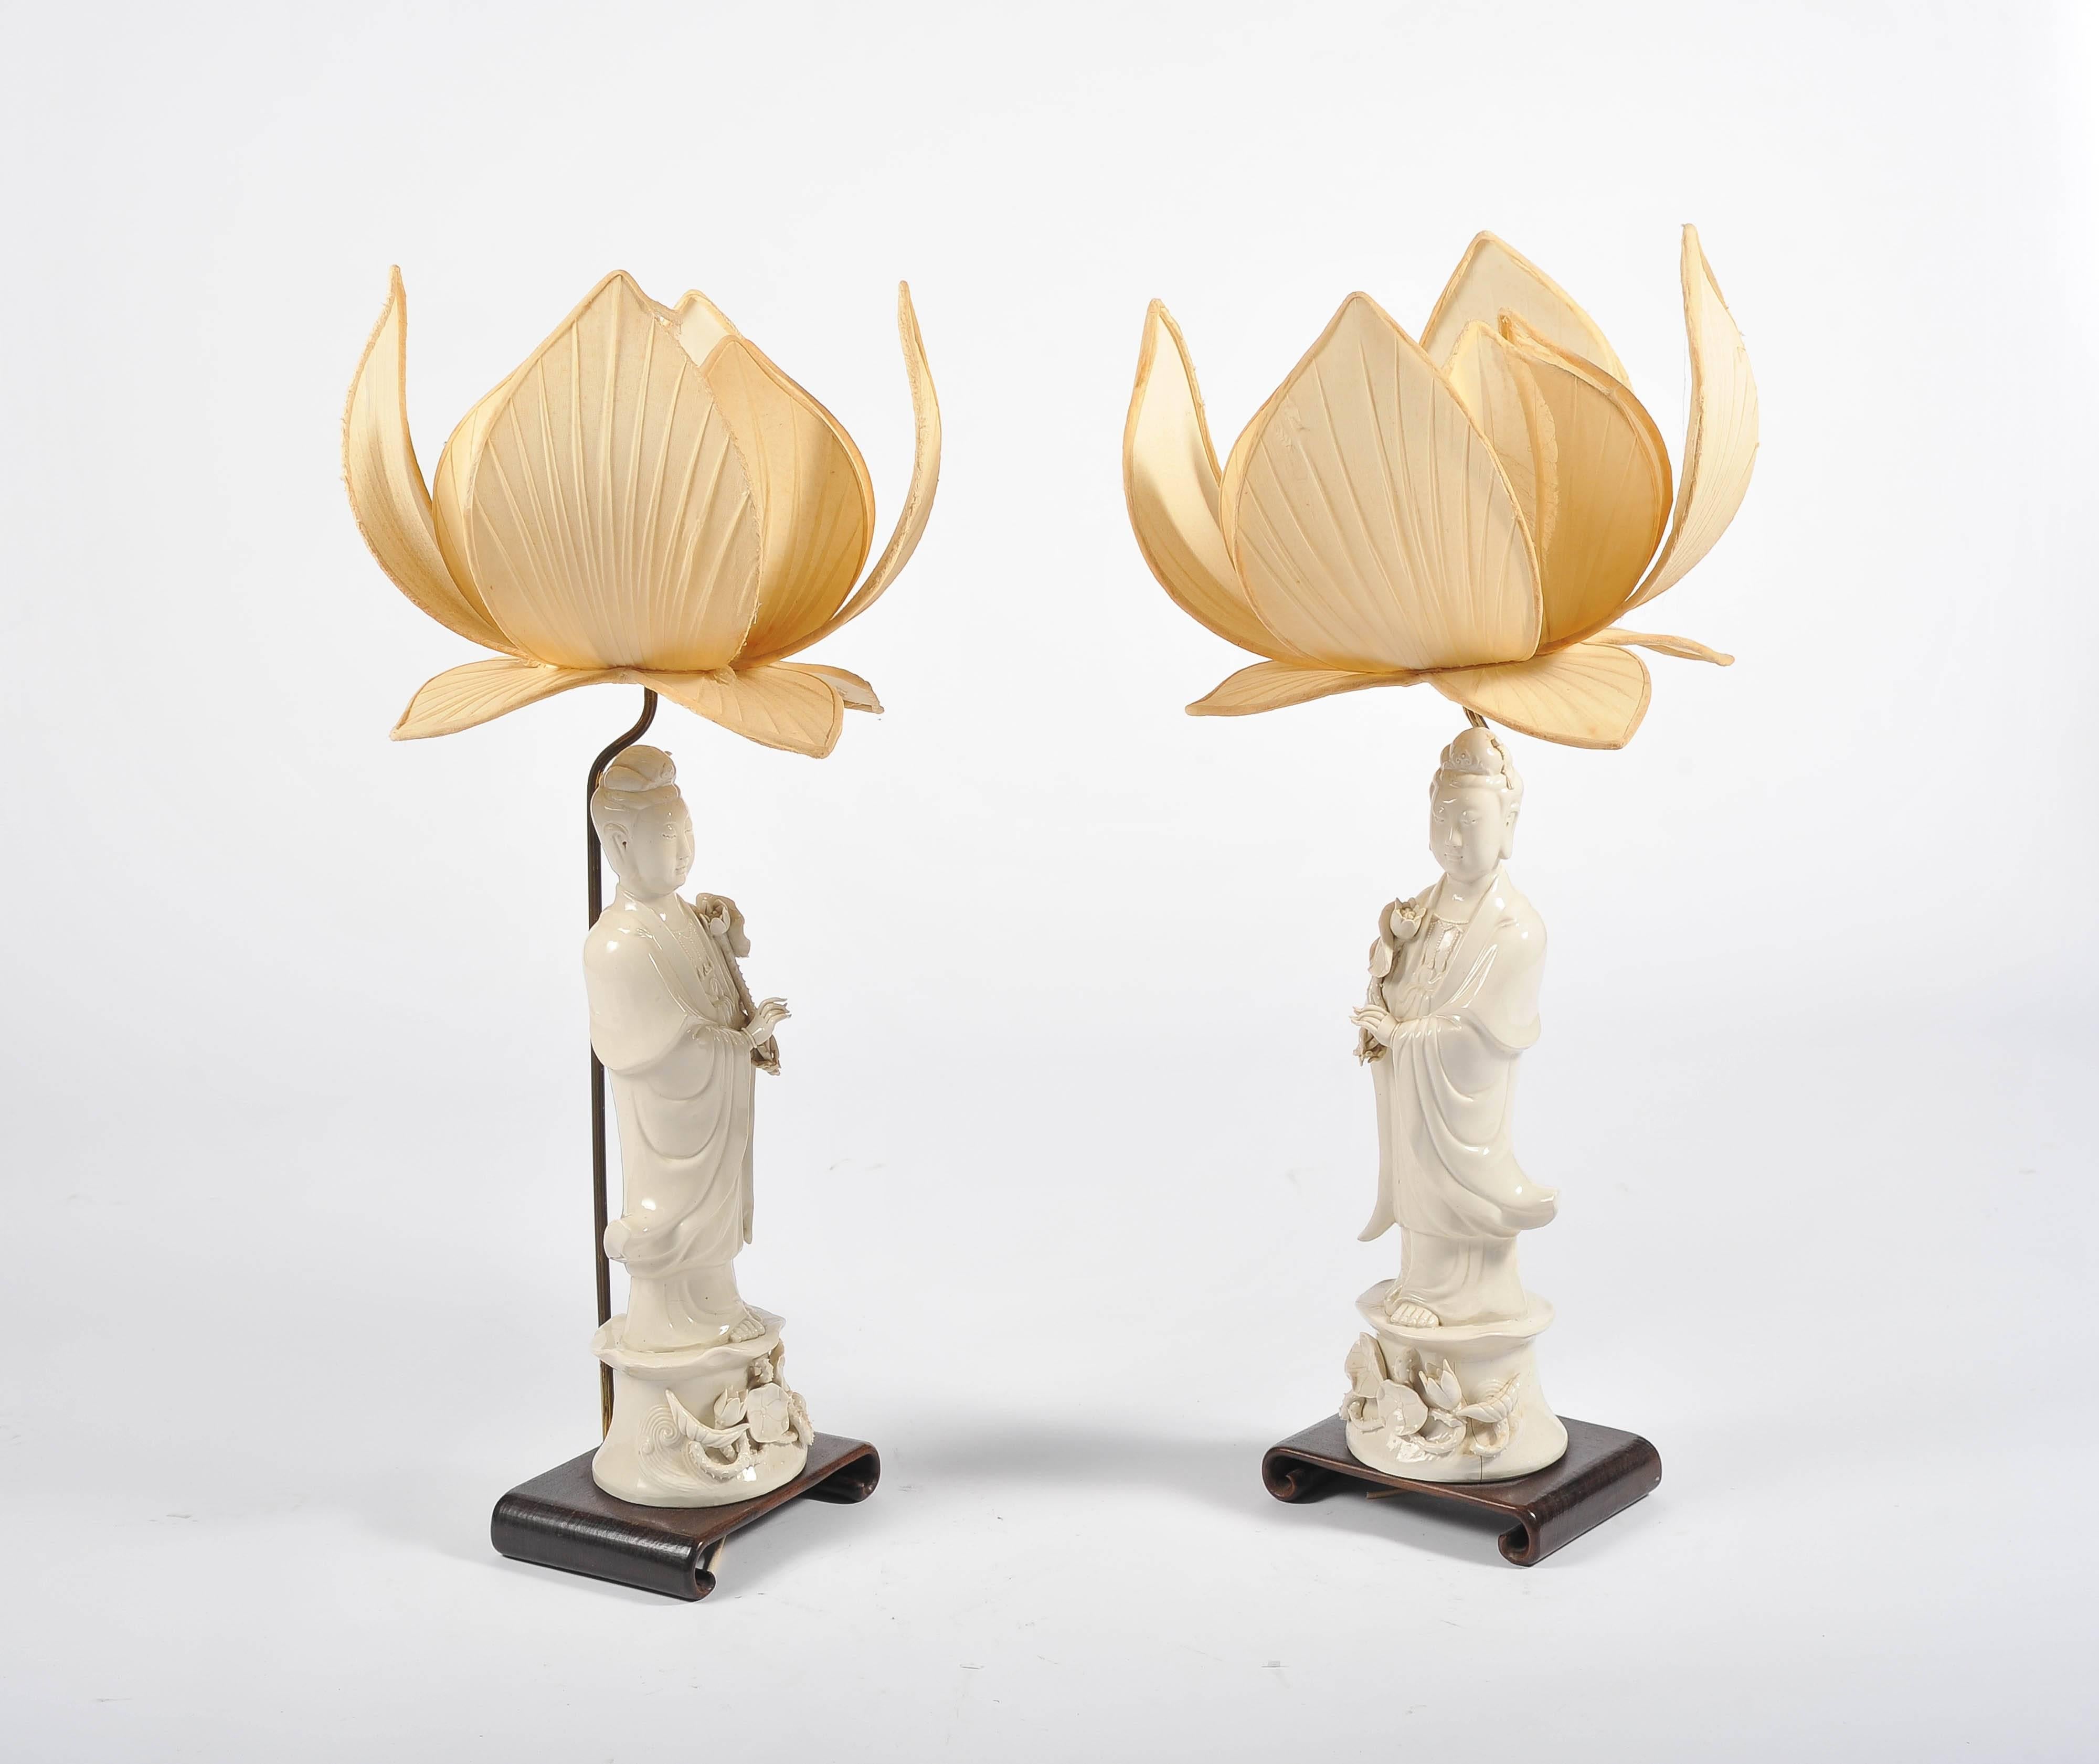 A very pleasing and decorative pair of Chinese Blanc de chine Guanyin lamps, each mounted on a scrolling hardwood base and lotus leaf style shades.